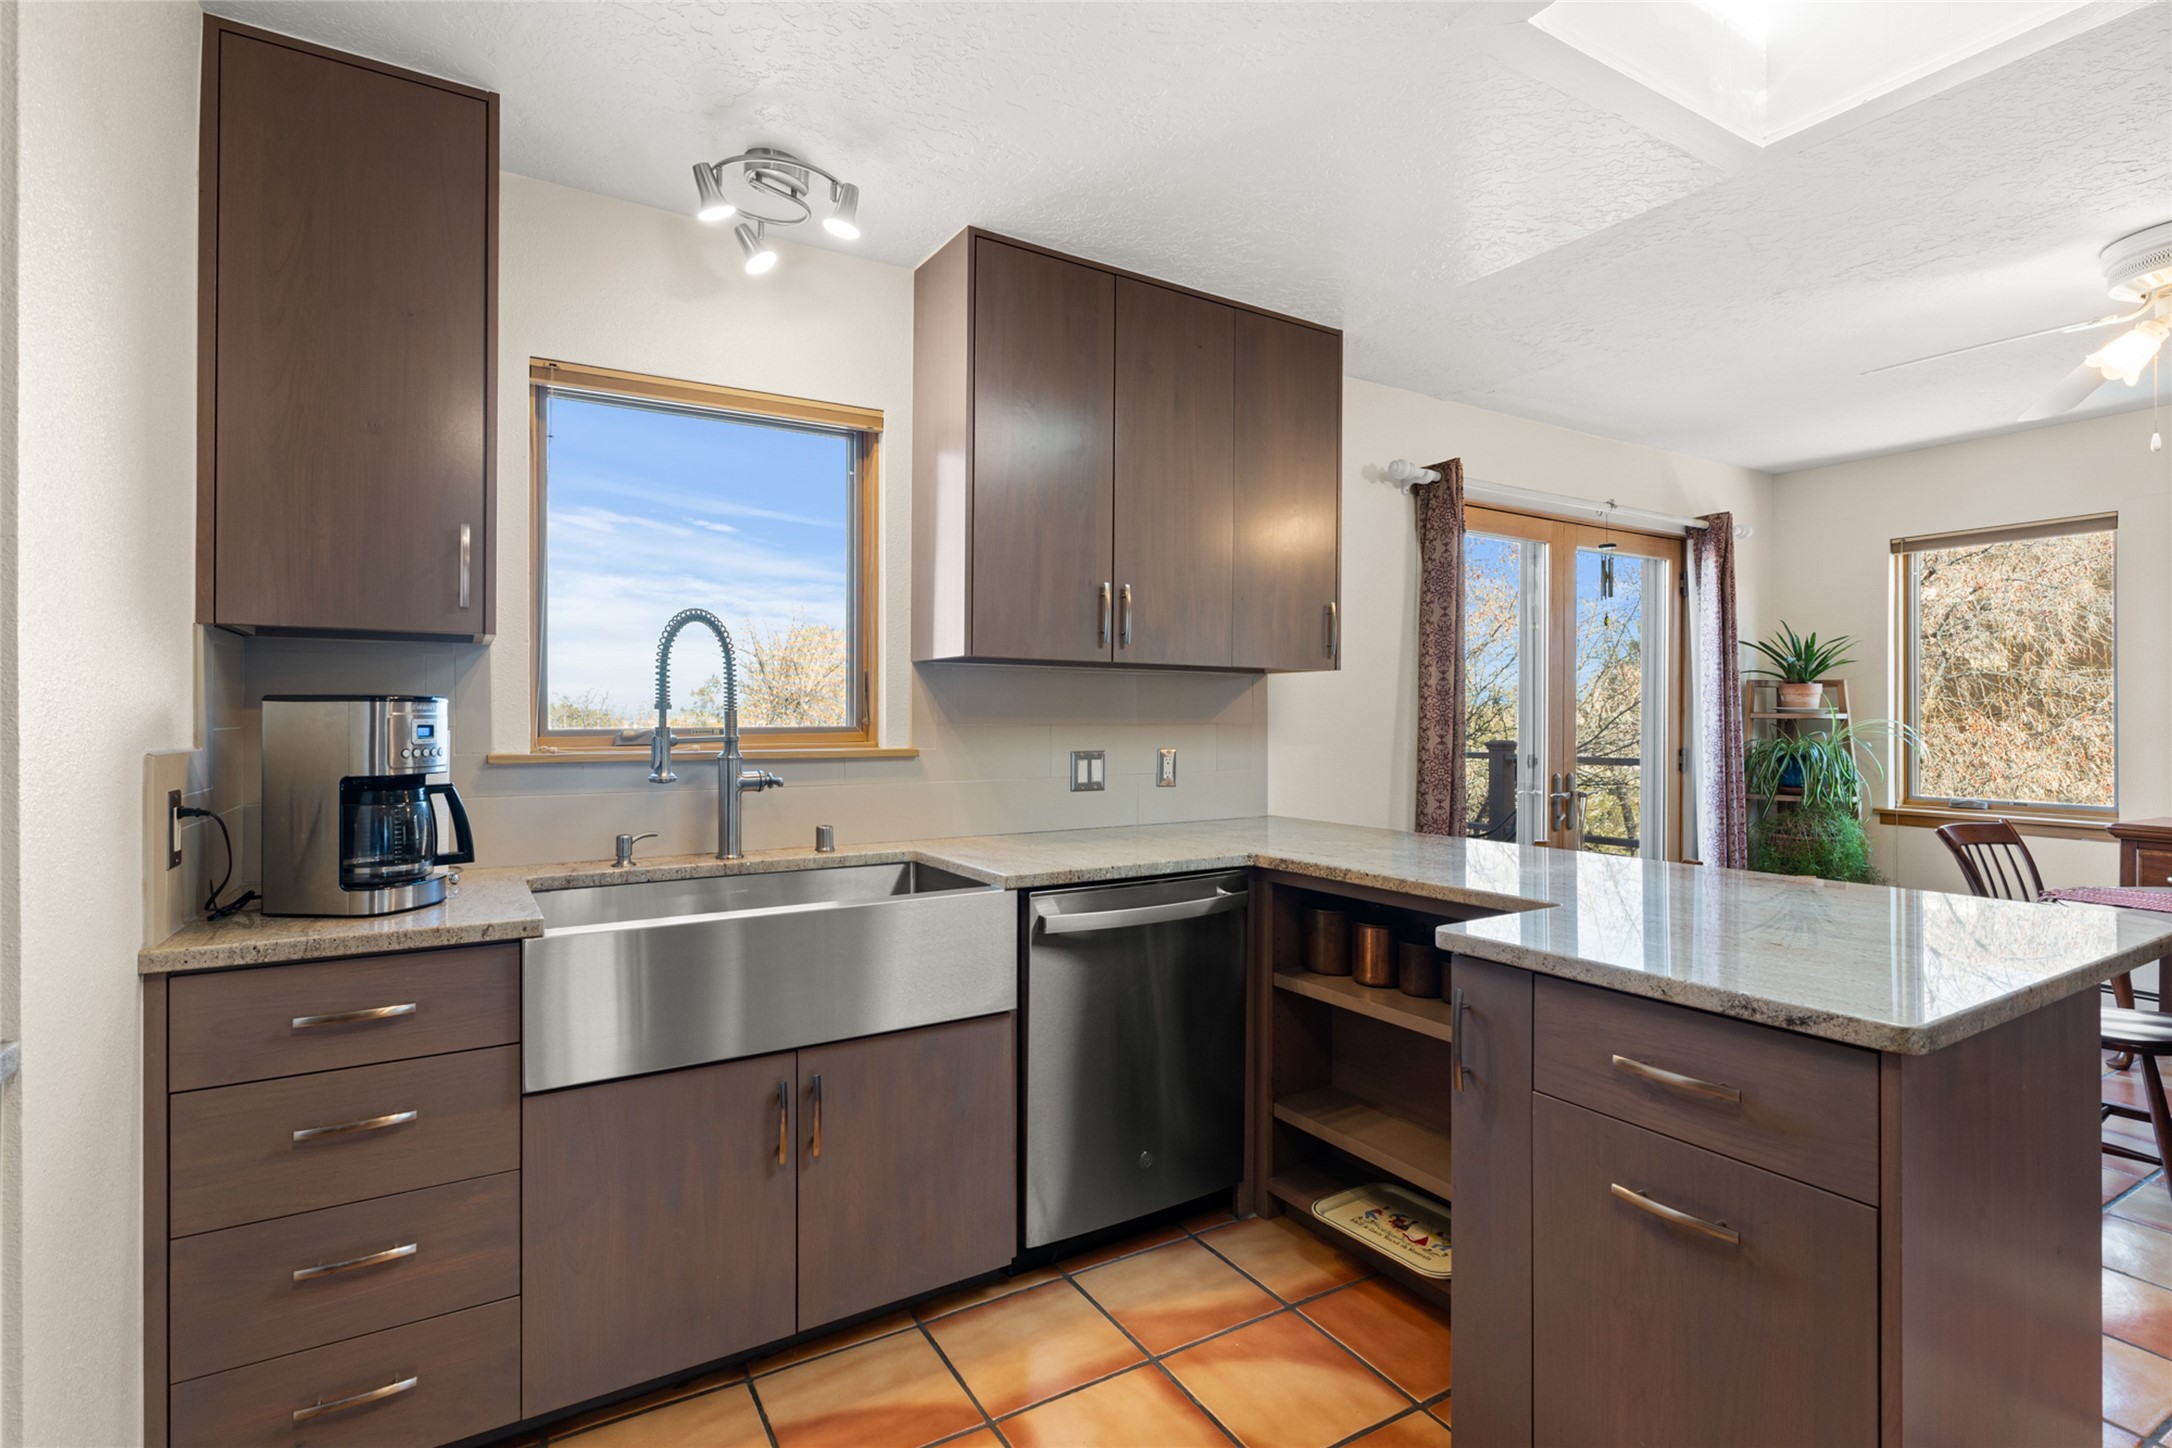 Newly updated kitchen with views to the Jemez